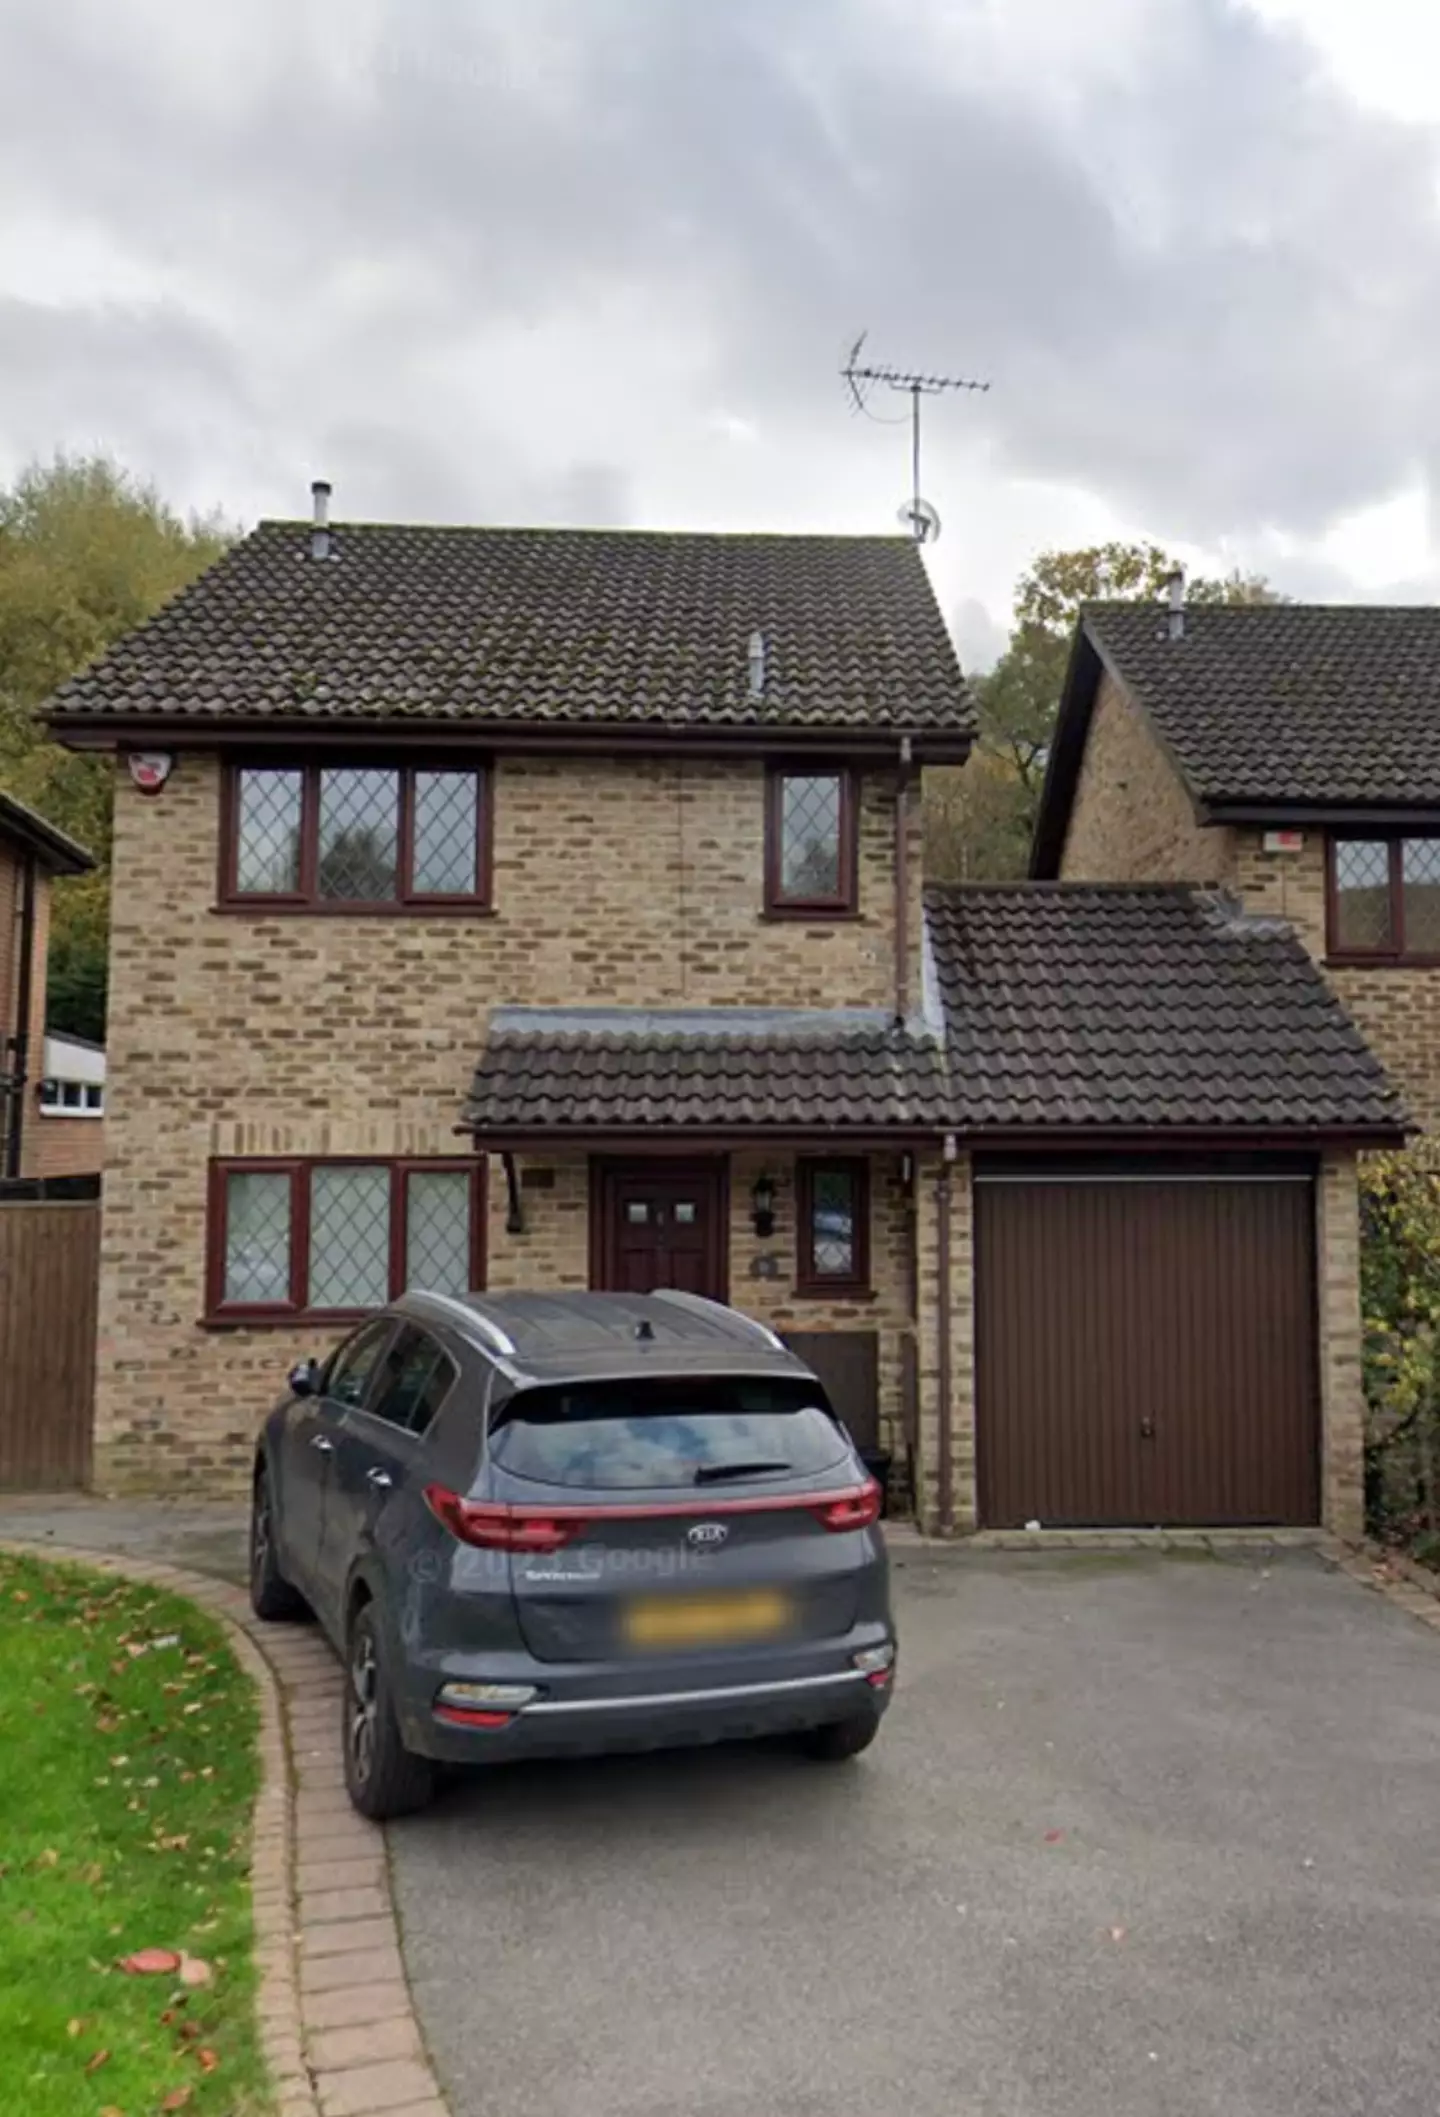 The owner of the house used for 4 Privet Drive has spoken out.